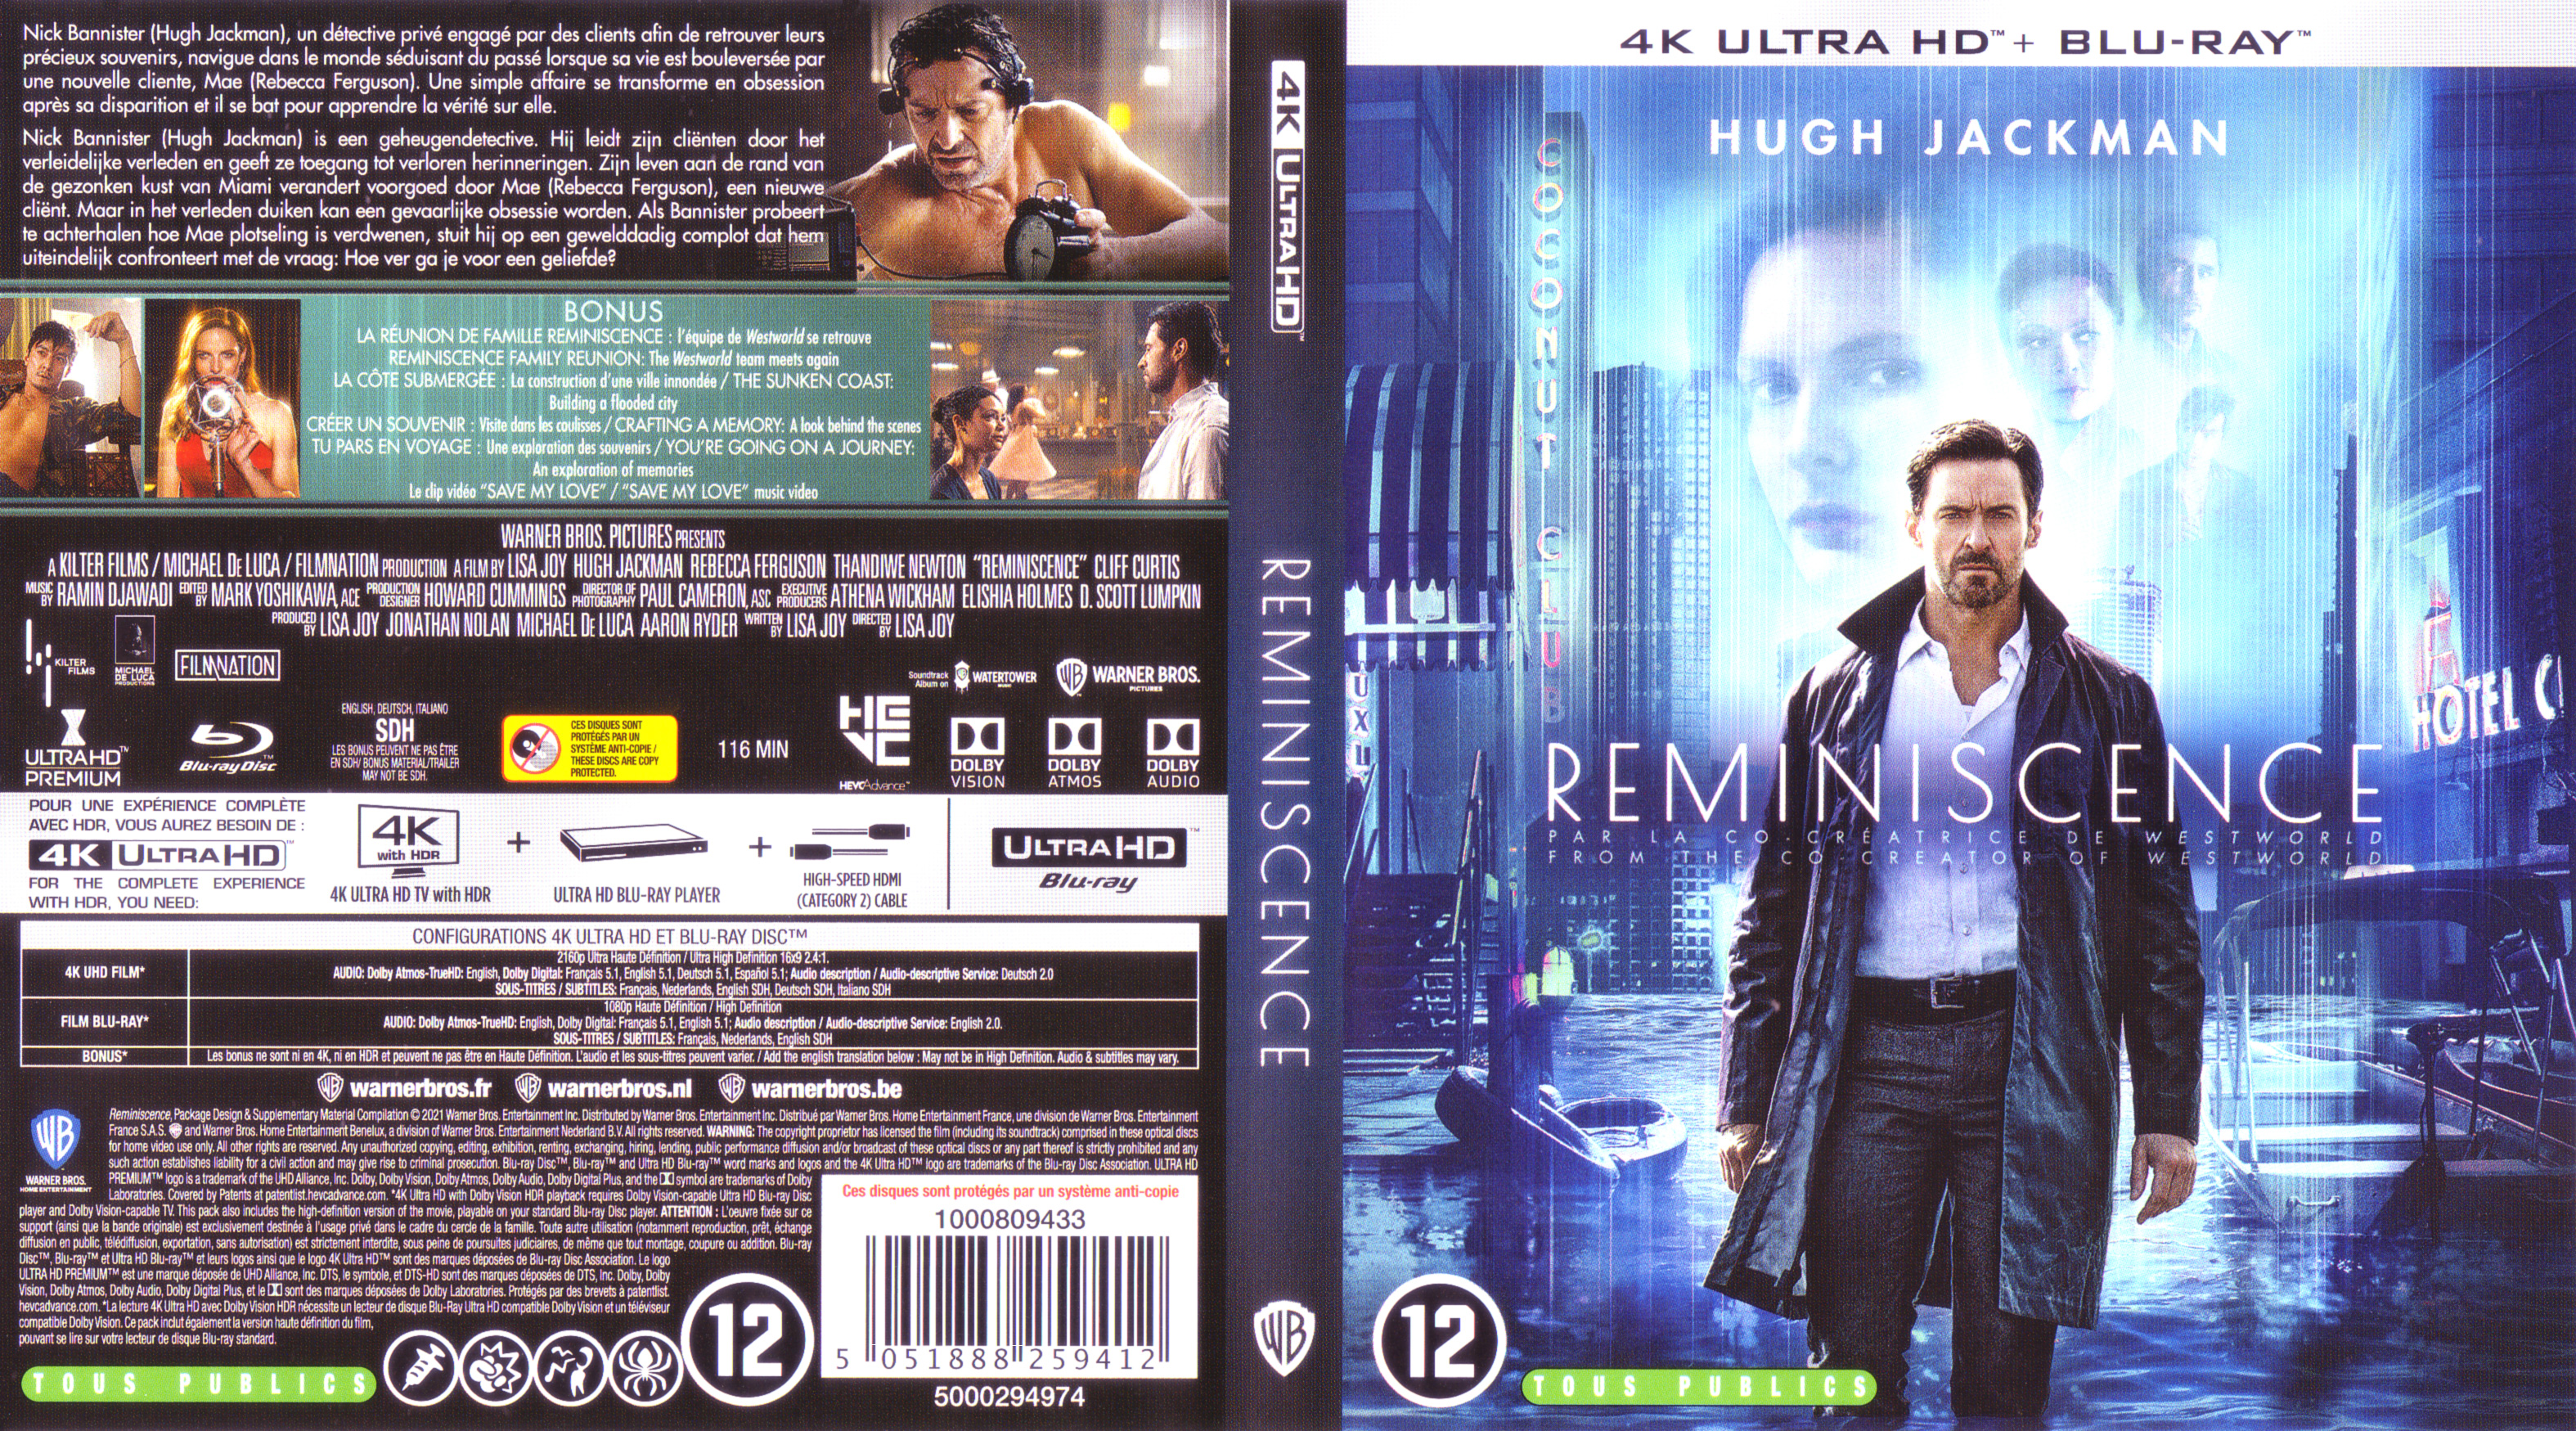 Jaquette DVD Reminiscence 4K (BLU-RAY)